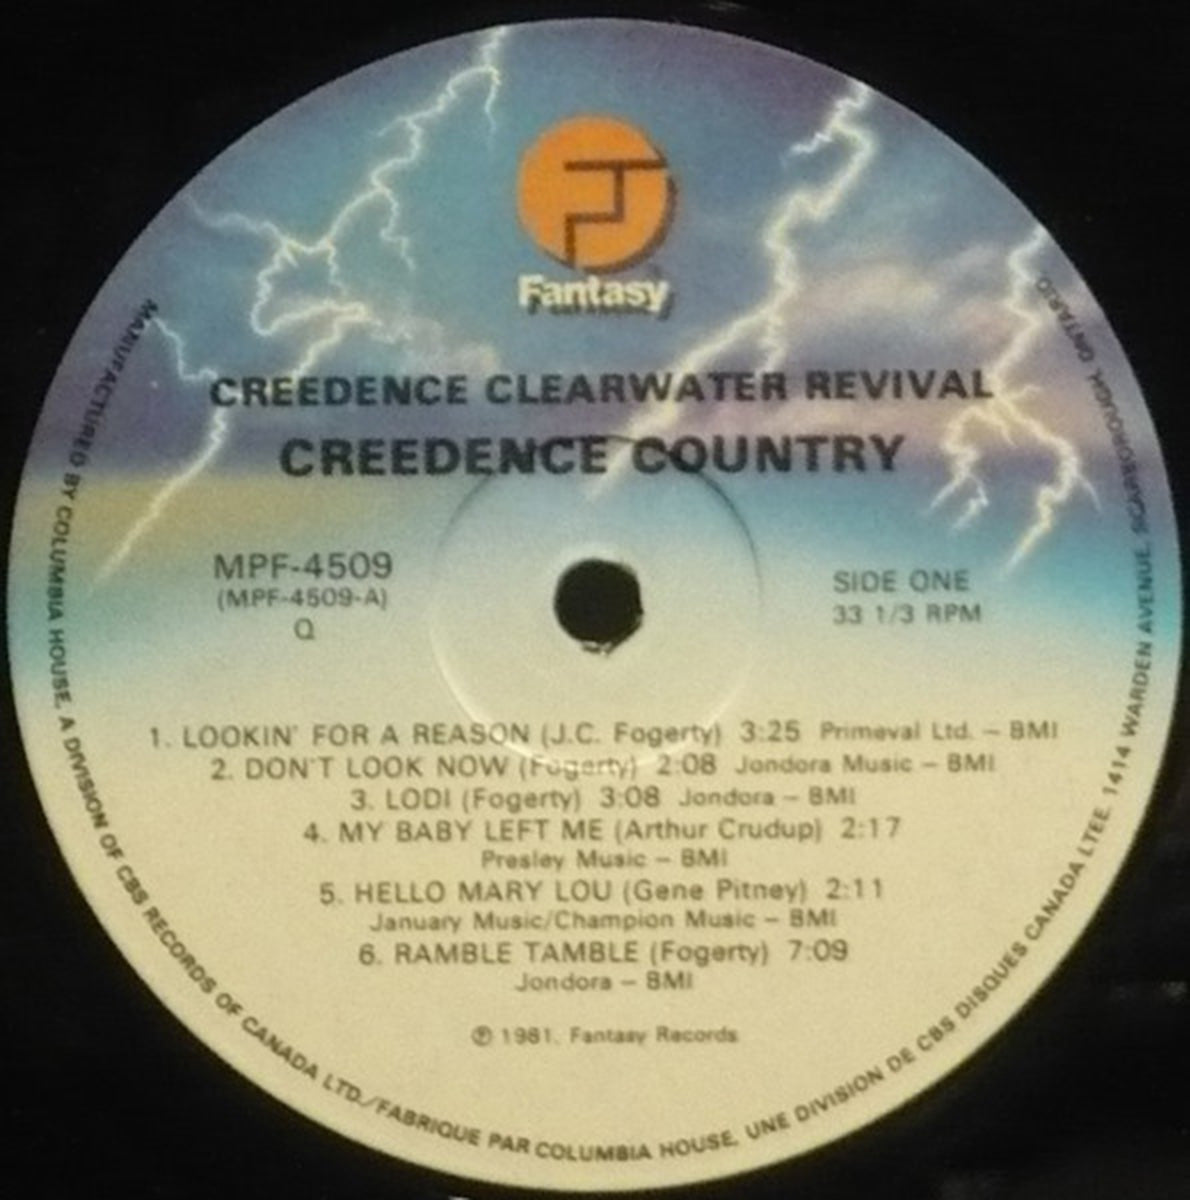 Creedence Clearwater Revival – Creedence Country